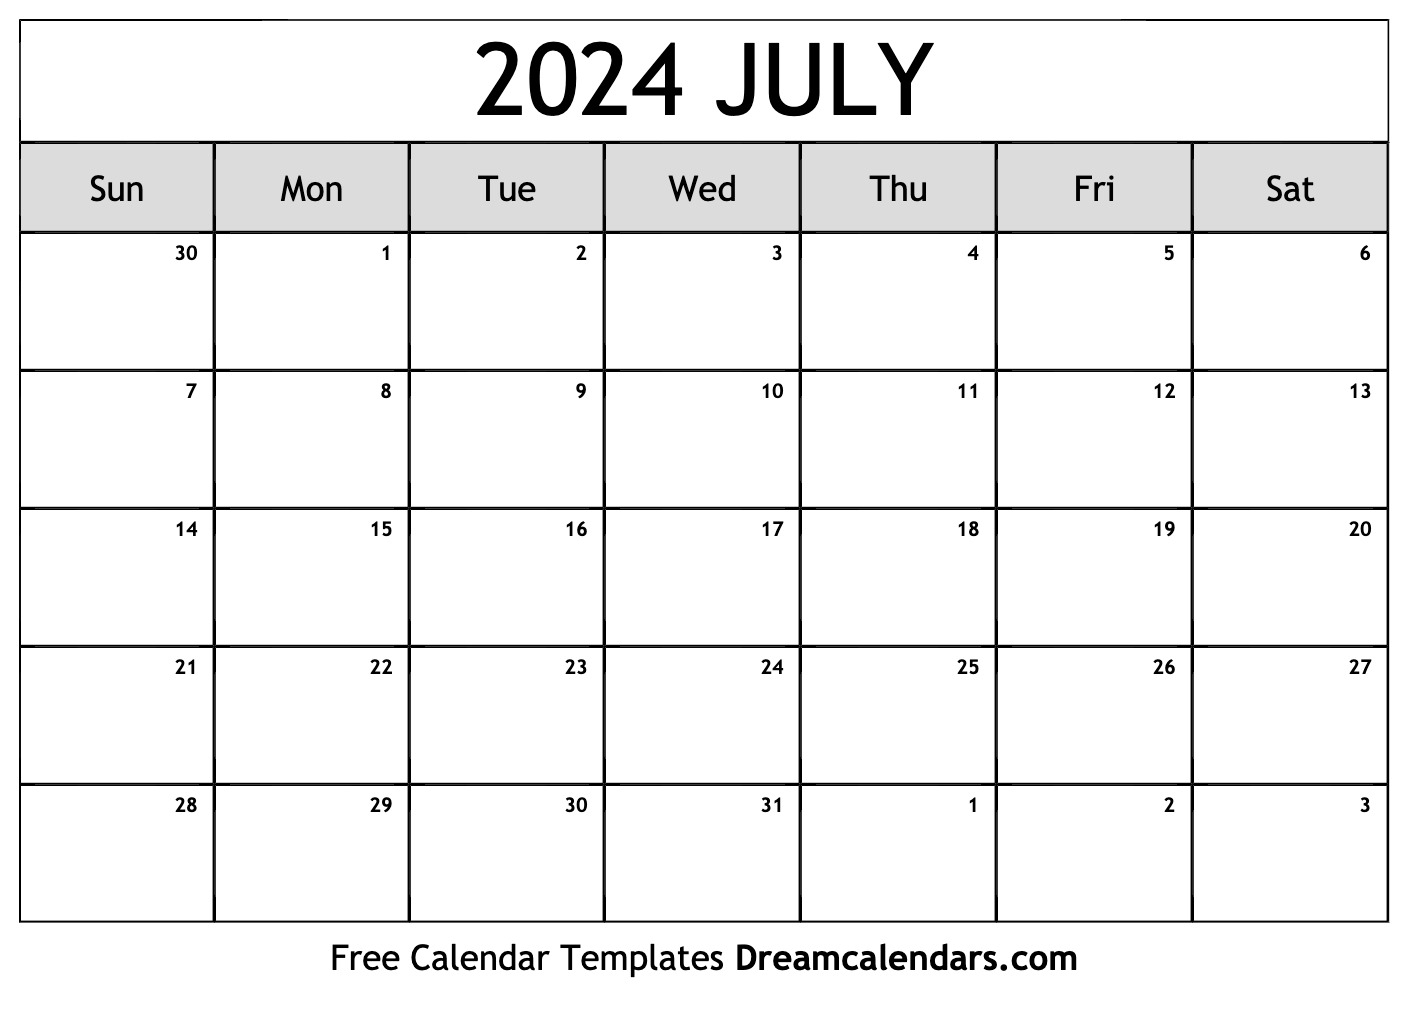 July 2024 Calendar | Free Blank Printable With Holidays for Free Printable July 2024 Calendar